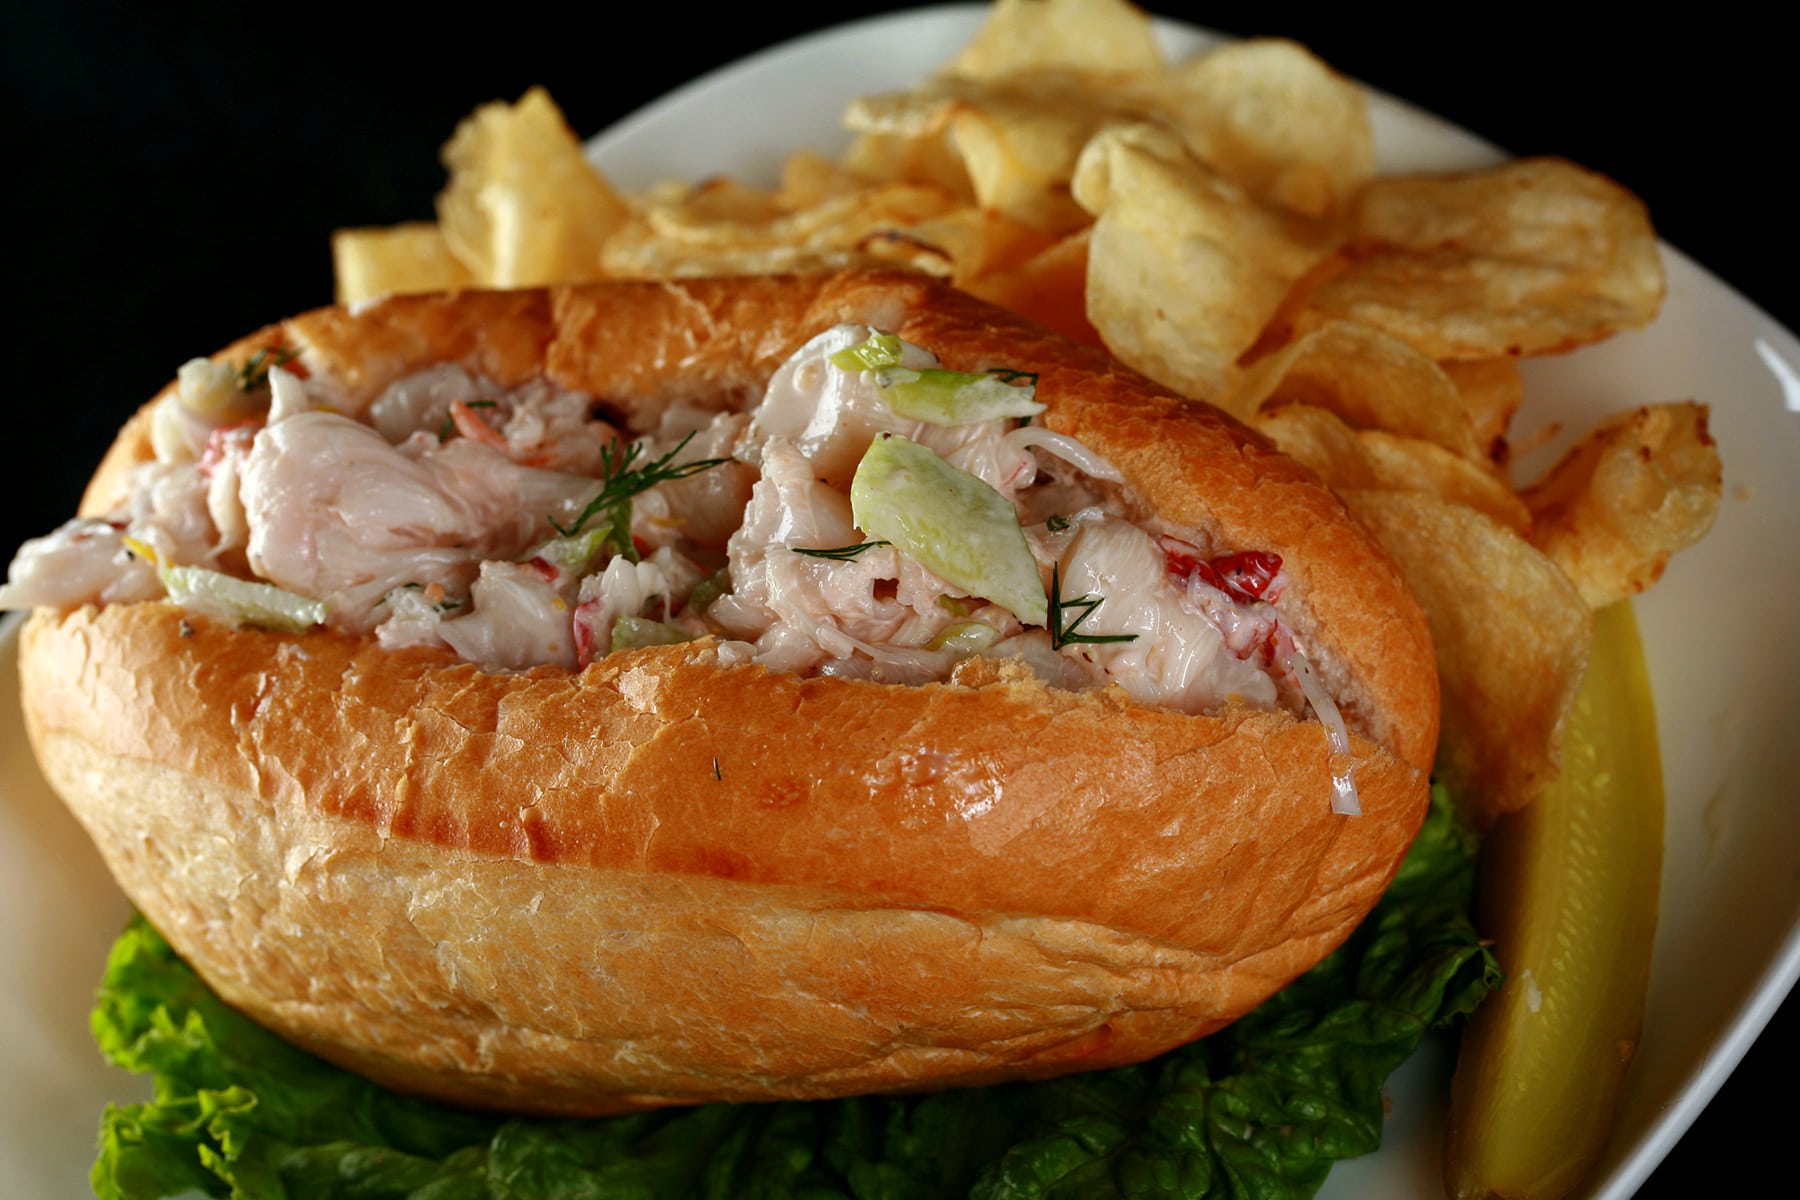 An Ultimate Lobster Roll sandwich on a plate with chips and a pickle.